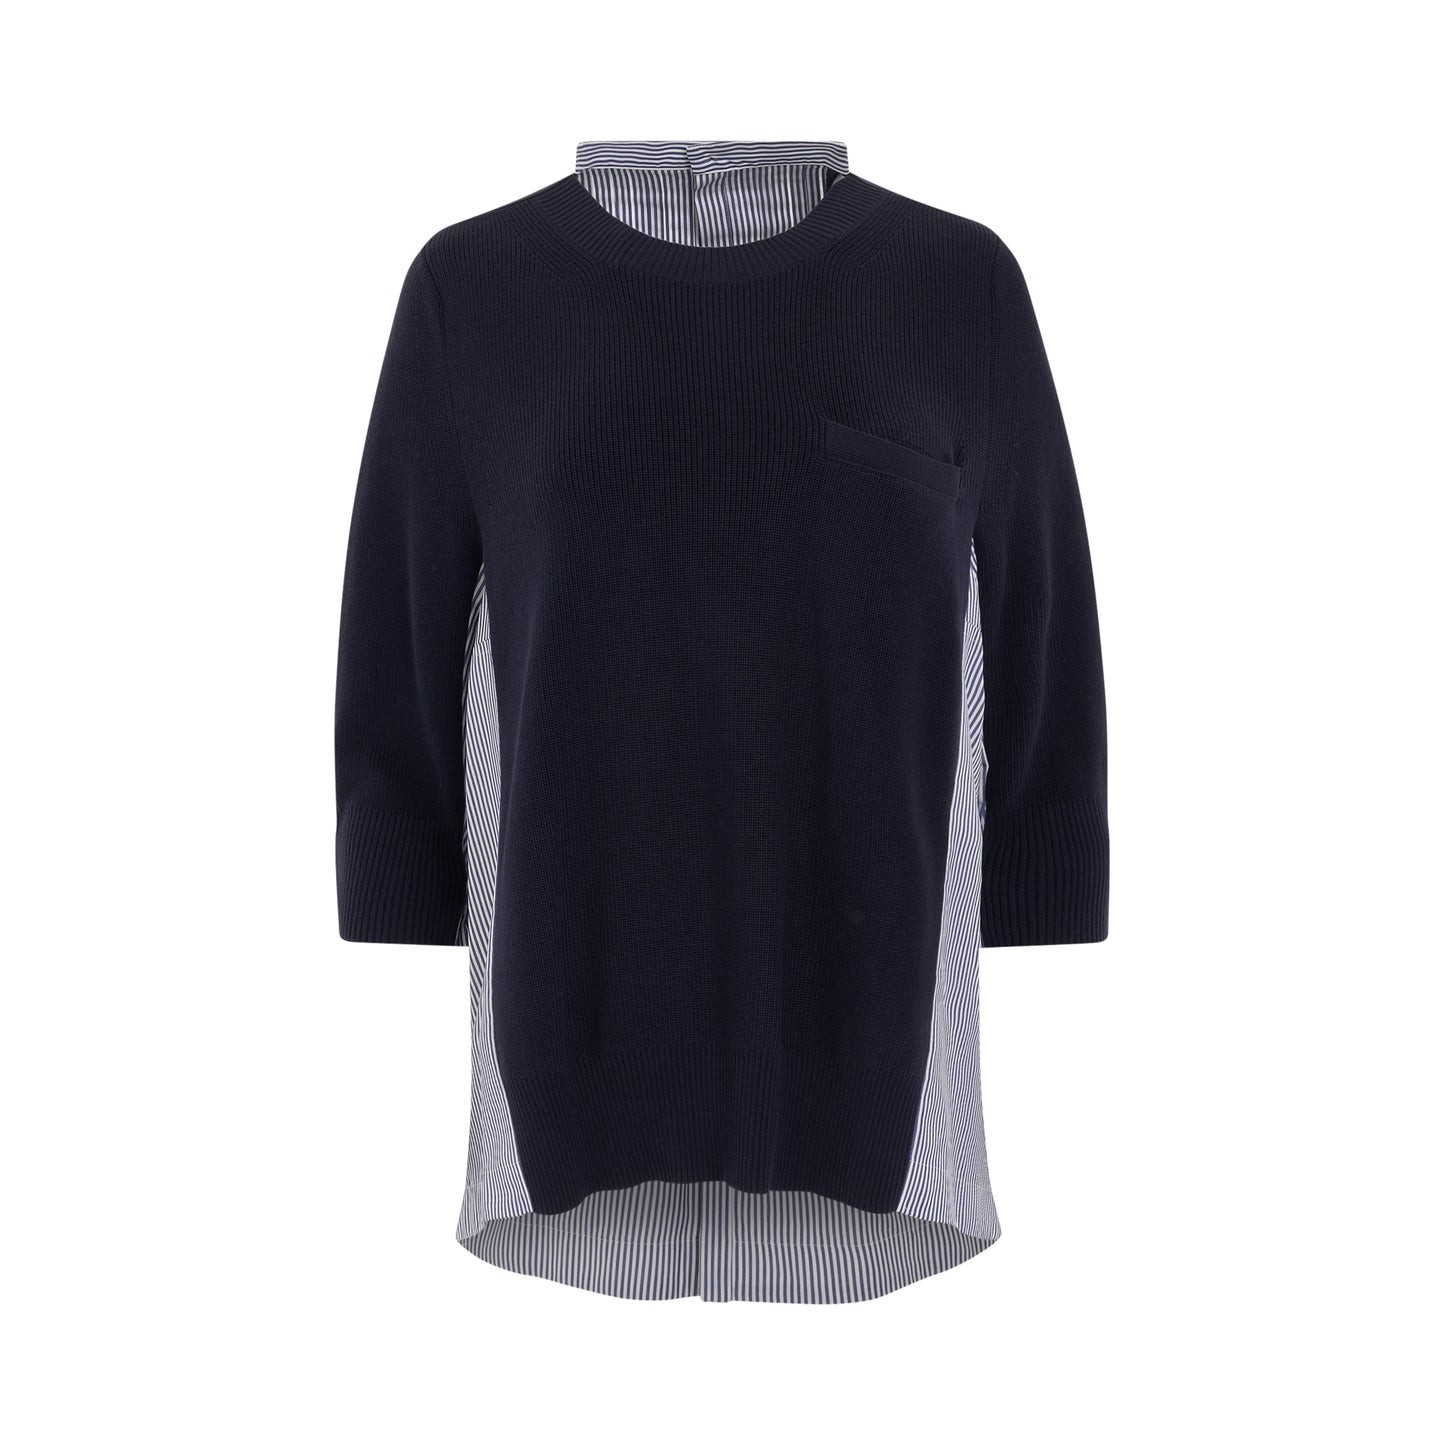 Panelled Crewneck Knit Pullover in Navy/Stripe